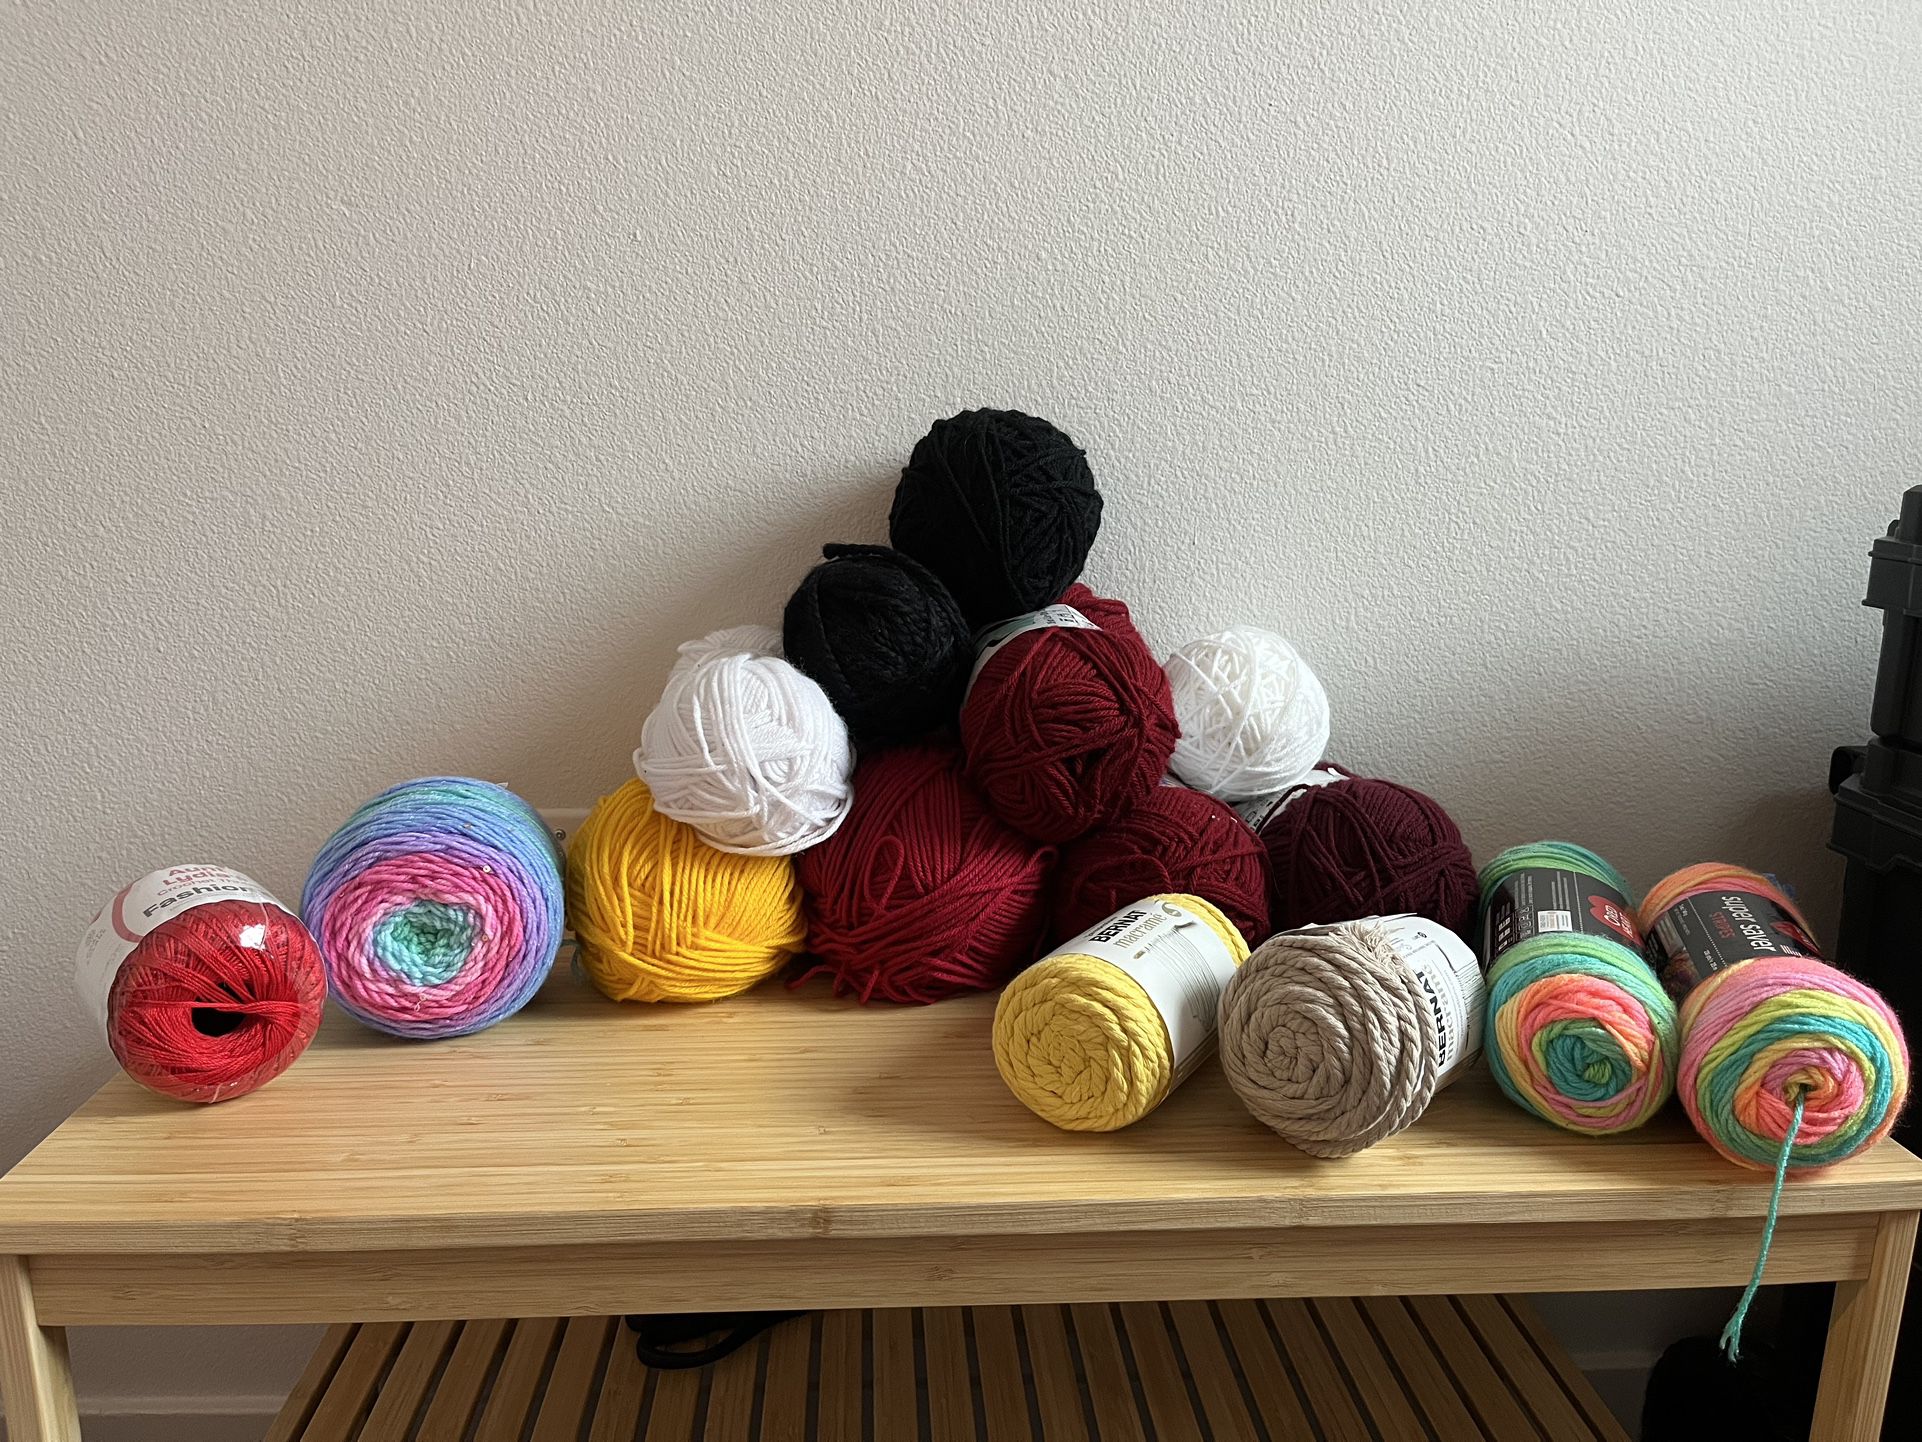 Assorted Yarn, Including Some Macrame Rope And Lace Making String 